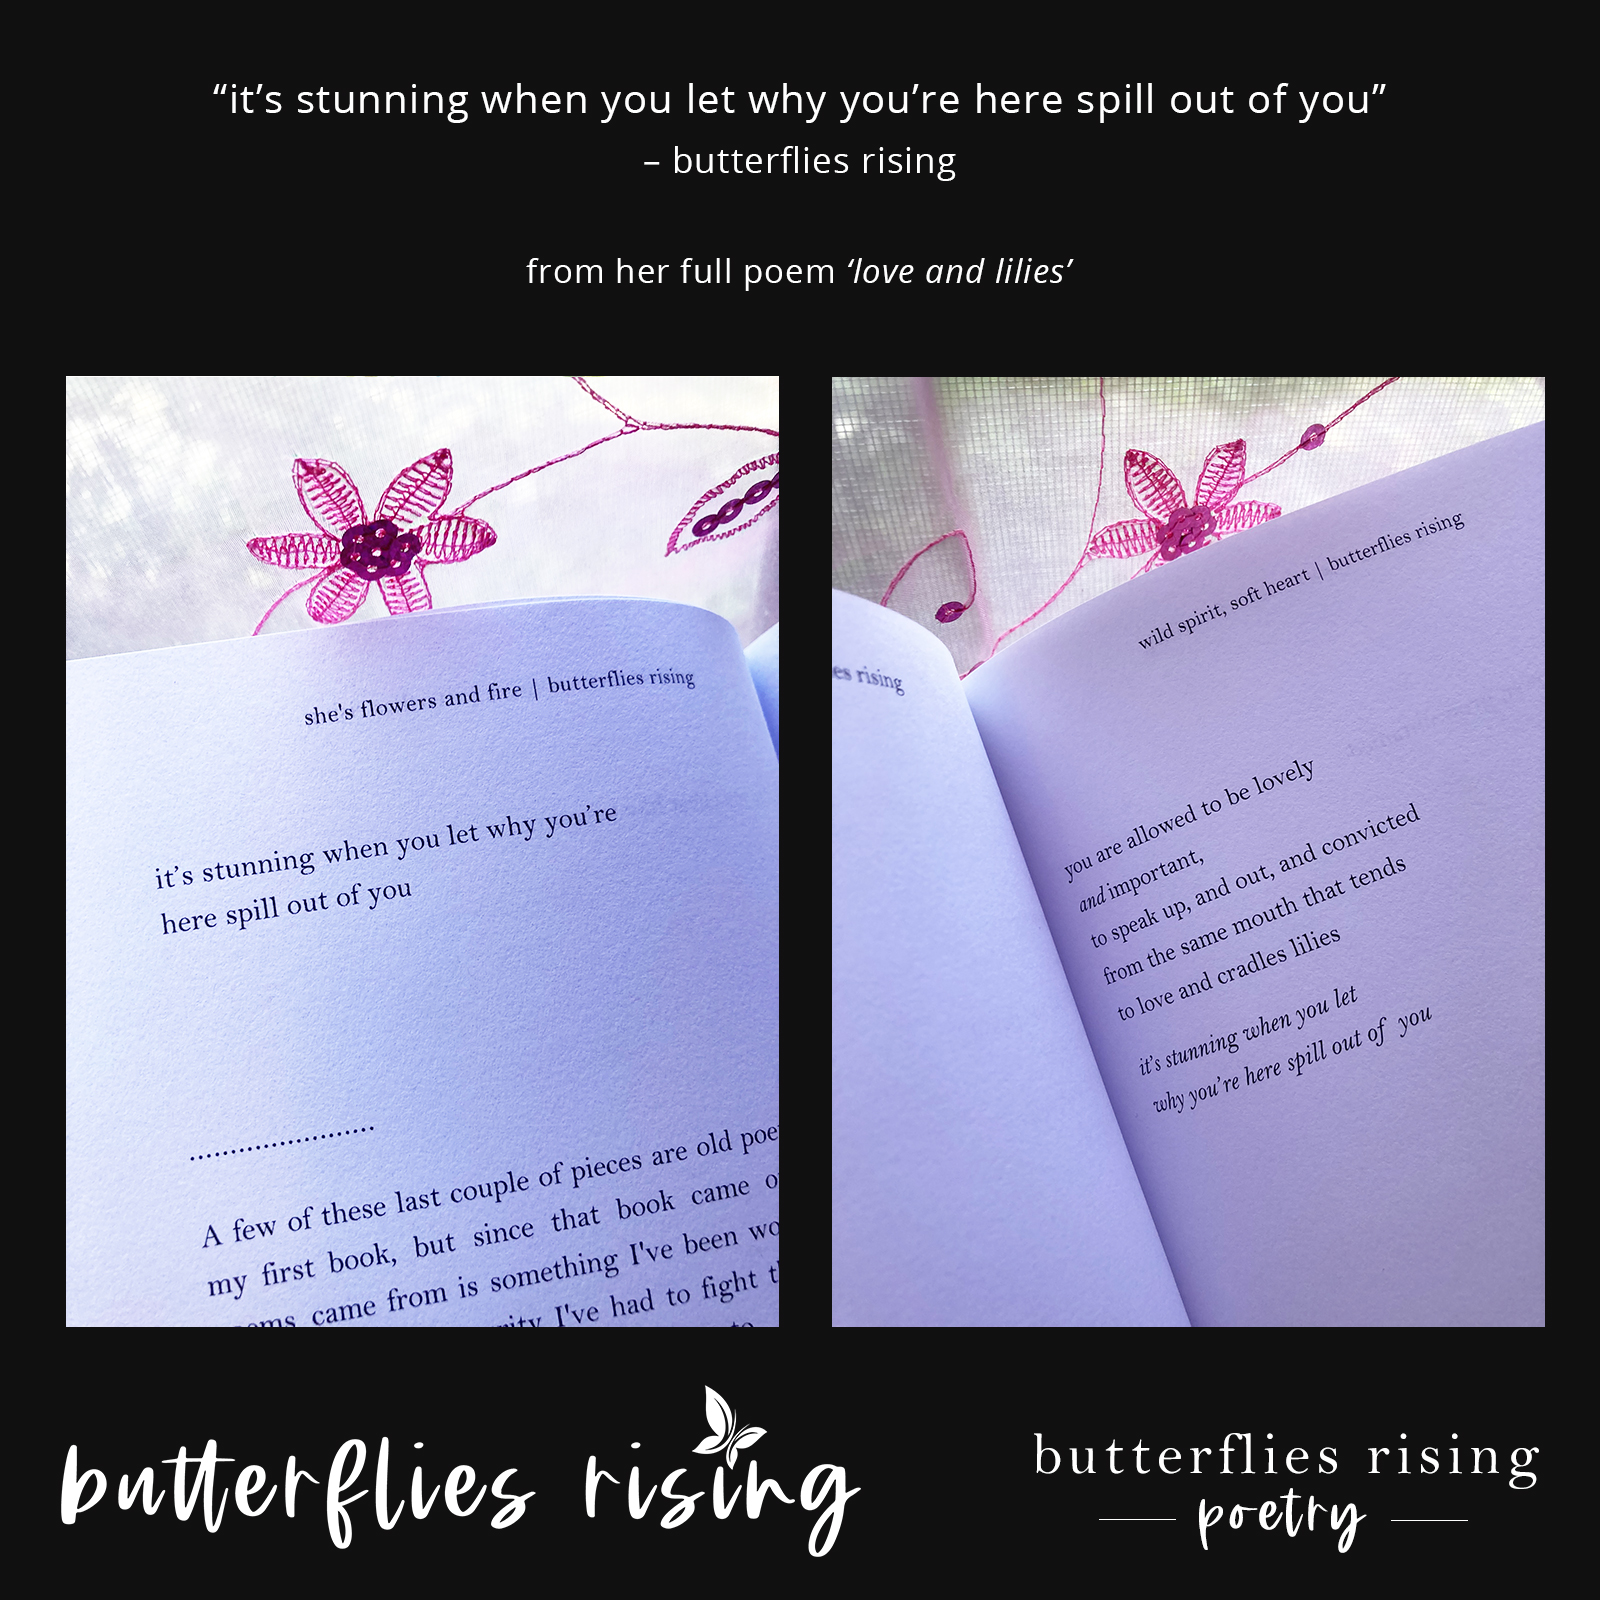 it’s stunning when you let why you’re here spill out of you - butterflies rising